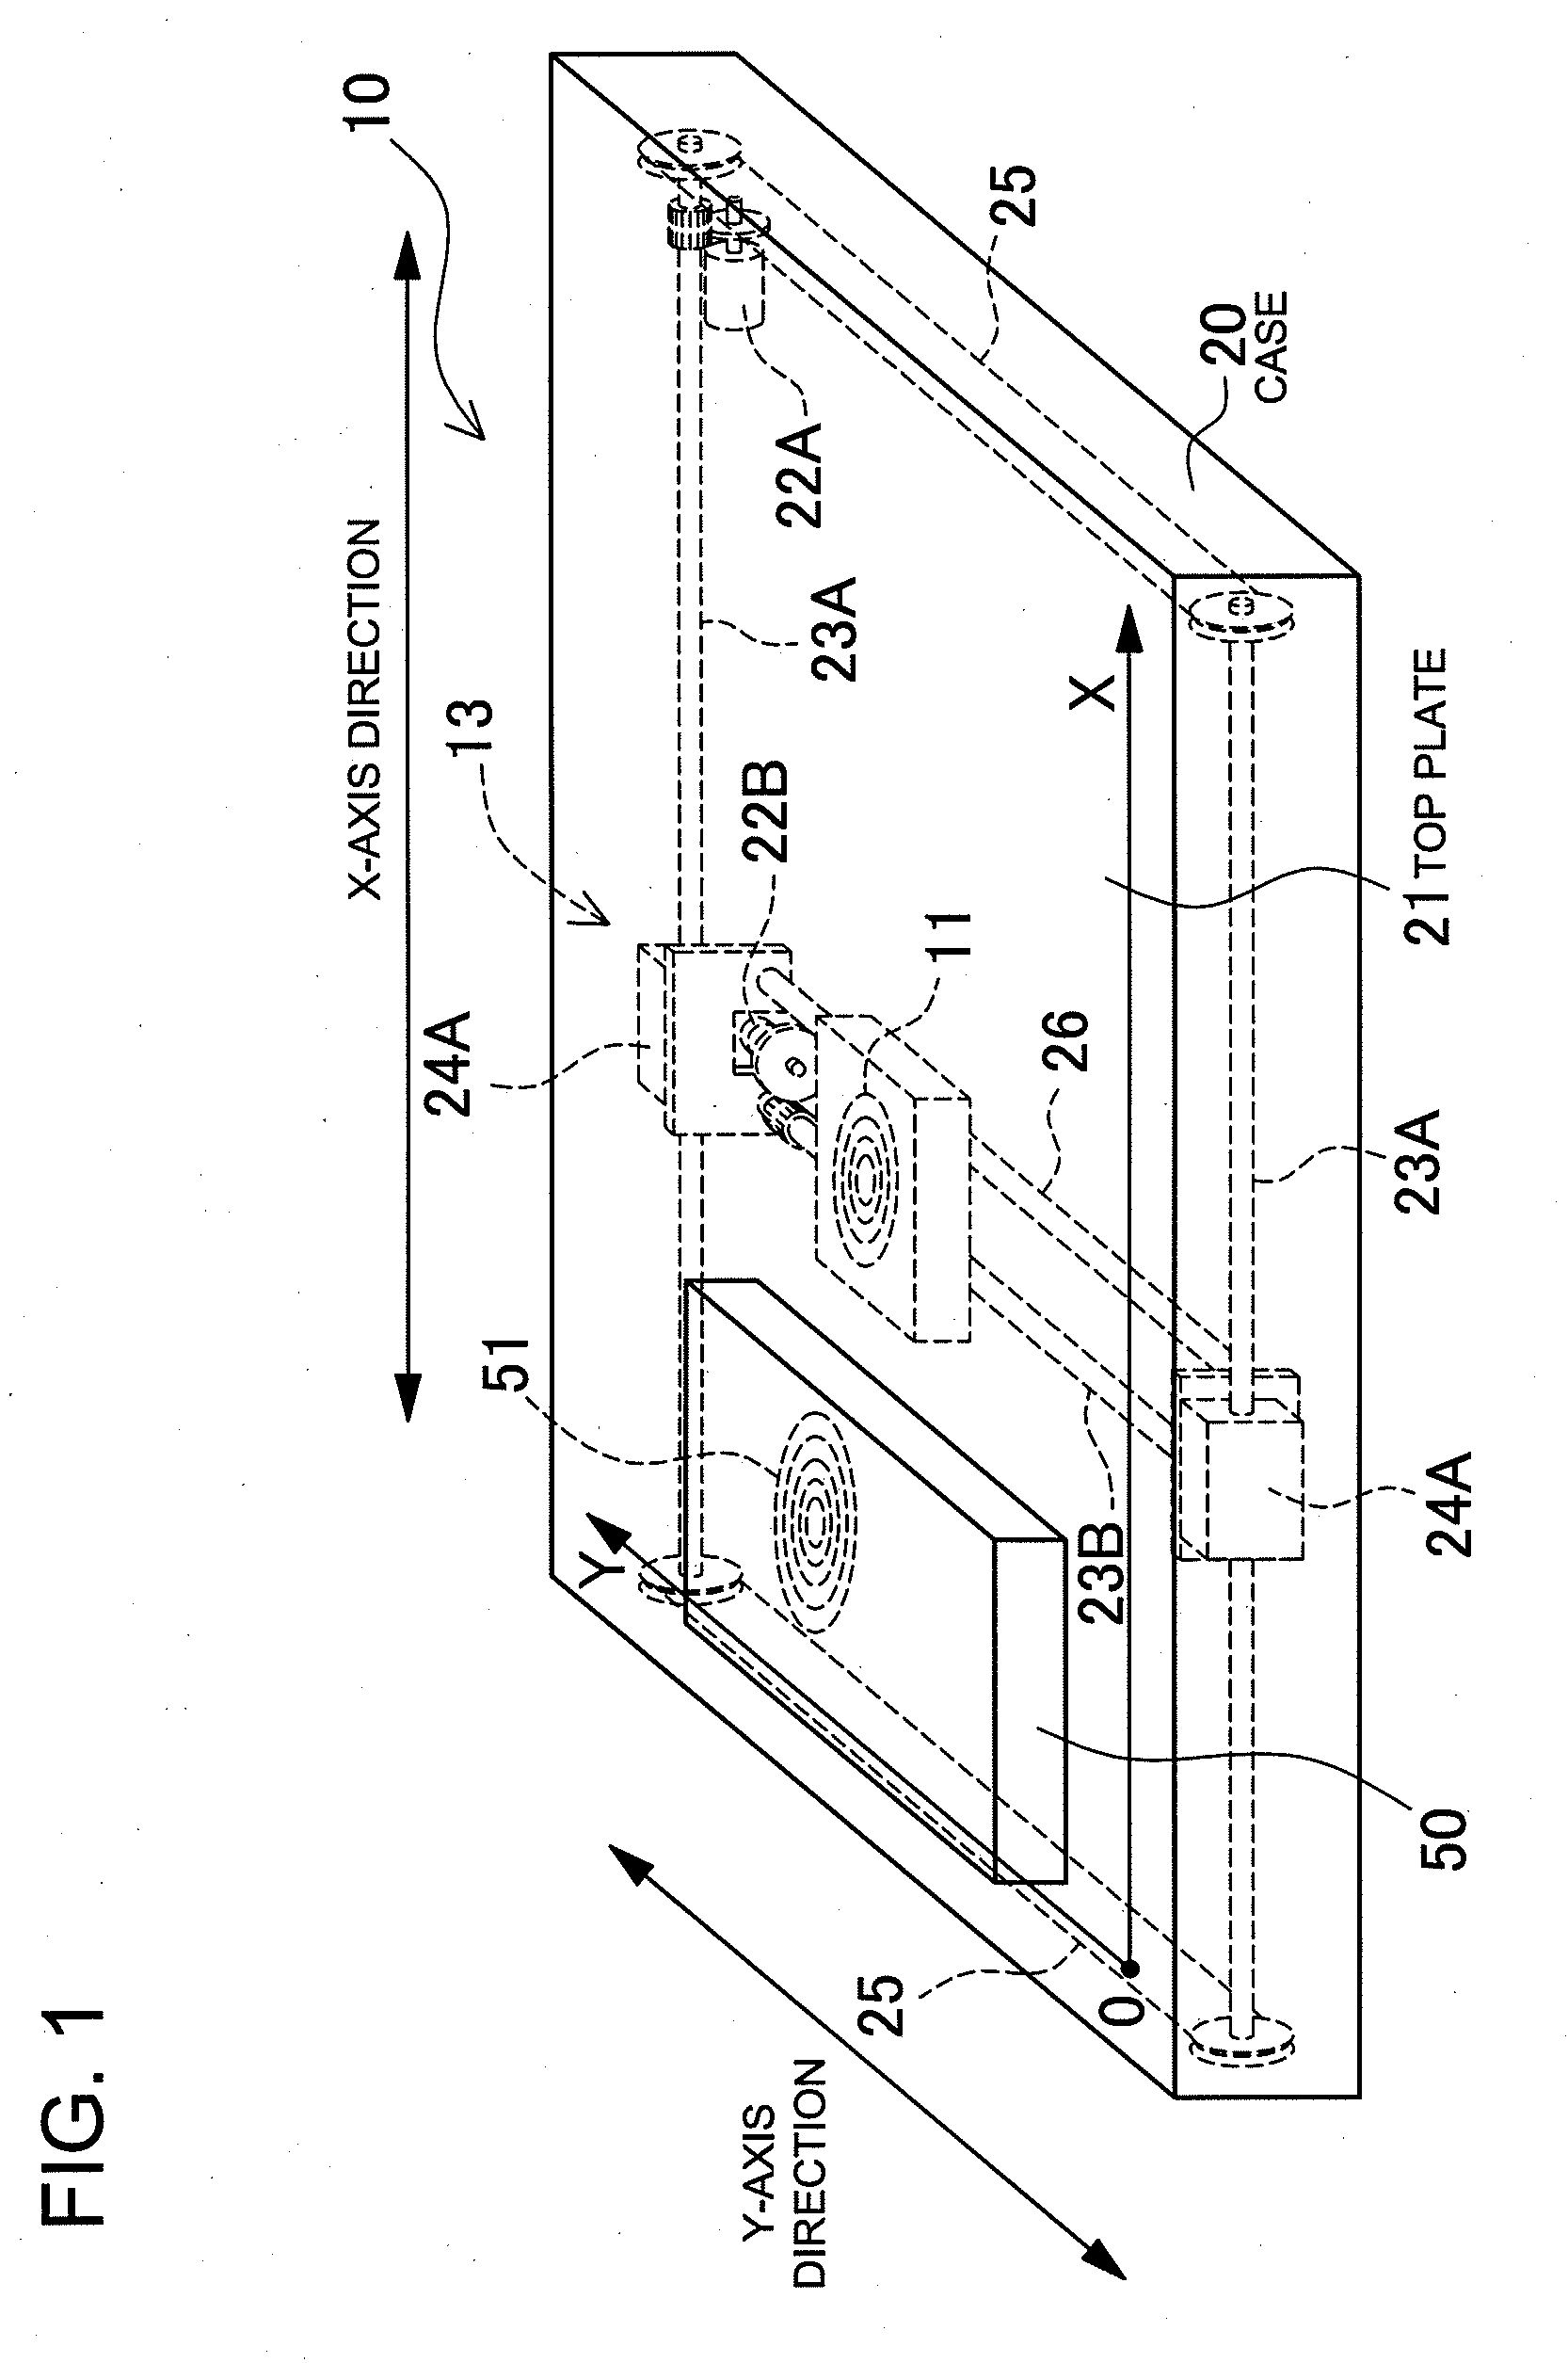 Battery charging pad employing magnetic induction